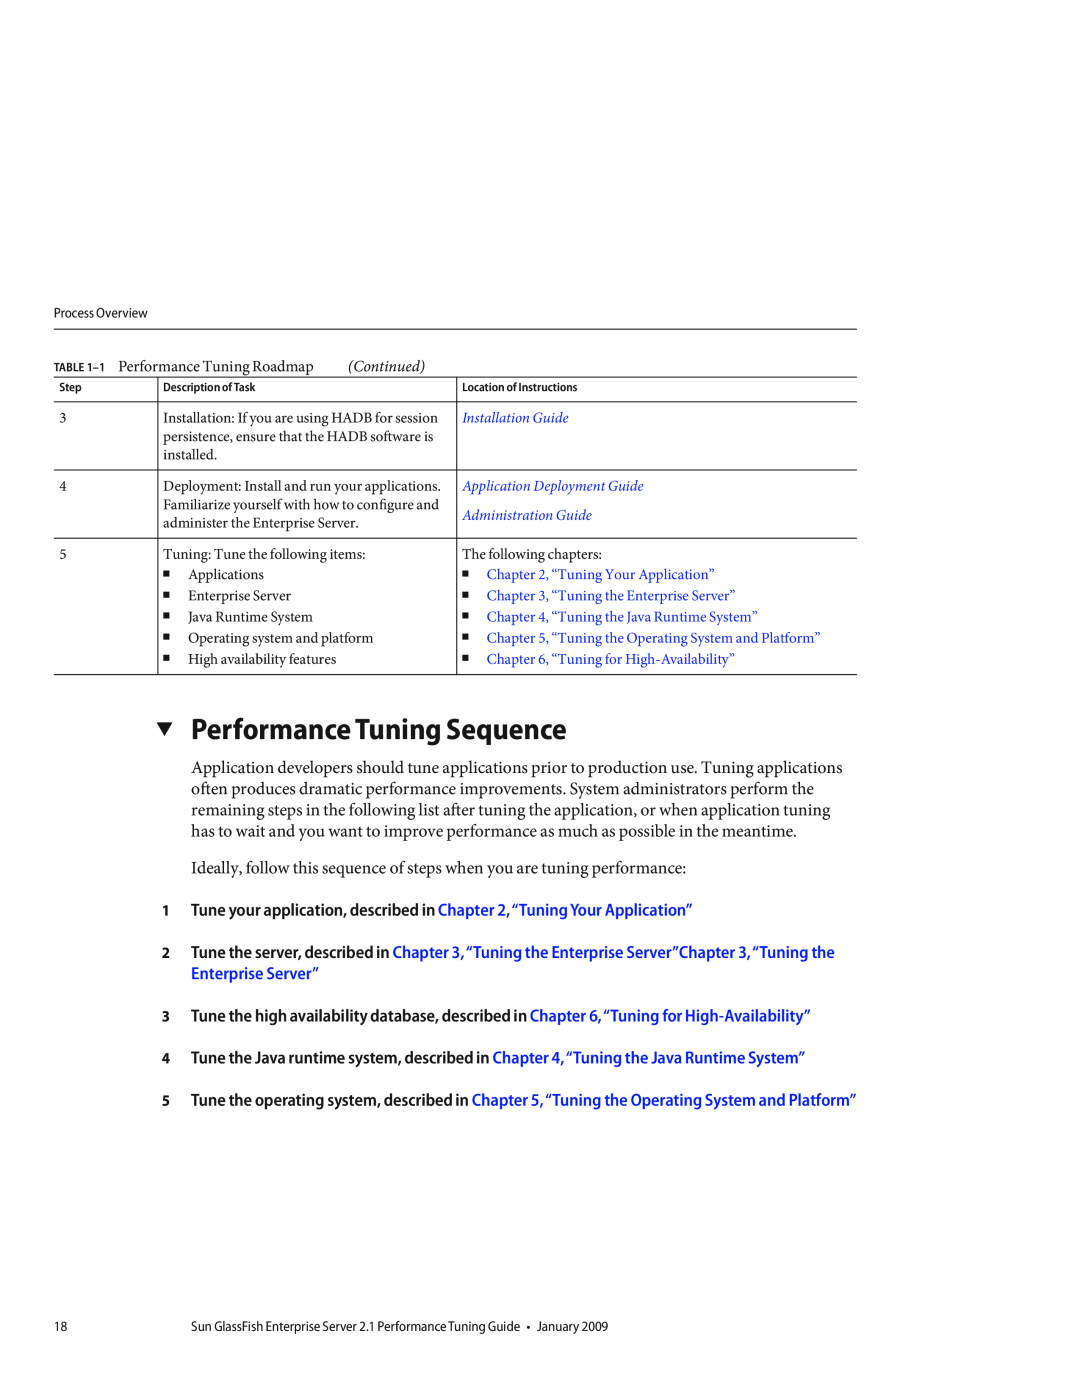 Sun Microsystems 820434310 manual Performance Tuning Sequence, Performance Tuning Roadmap 